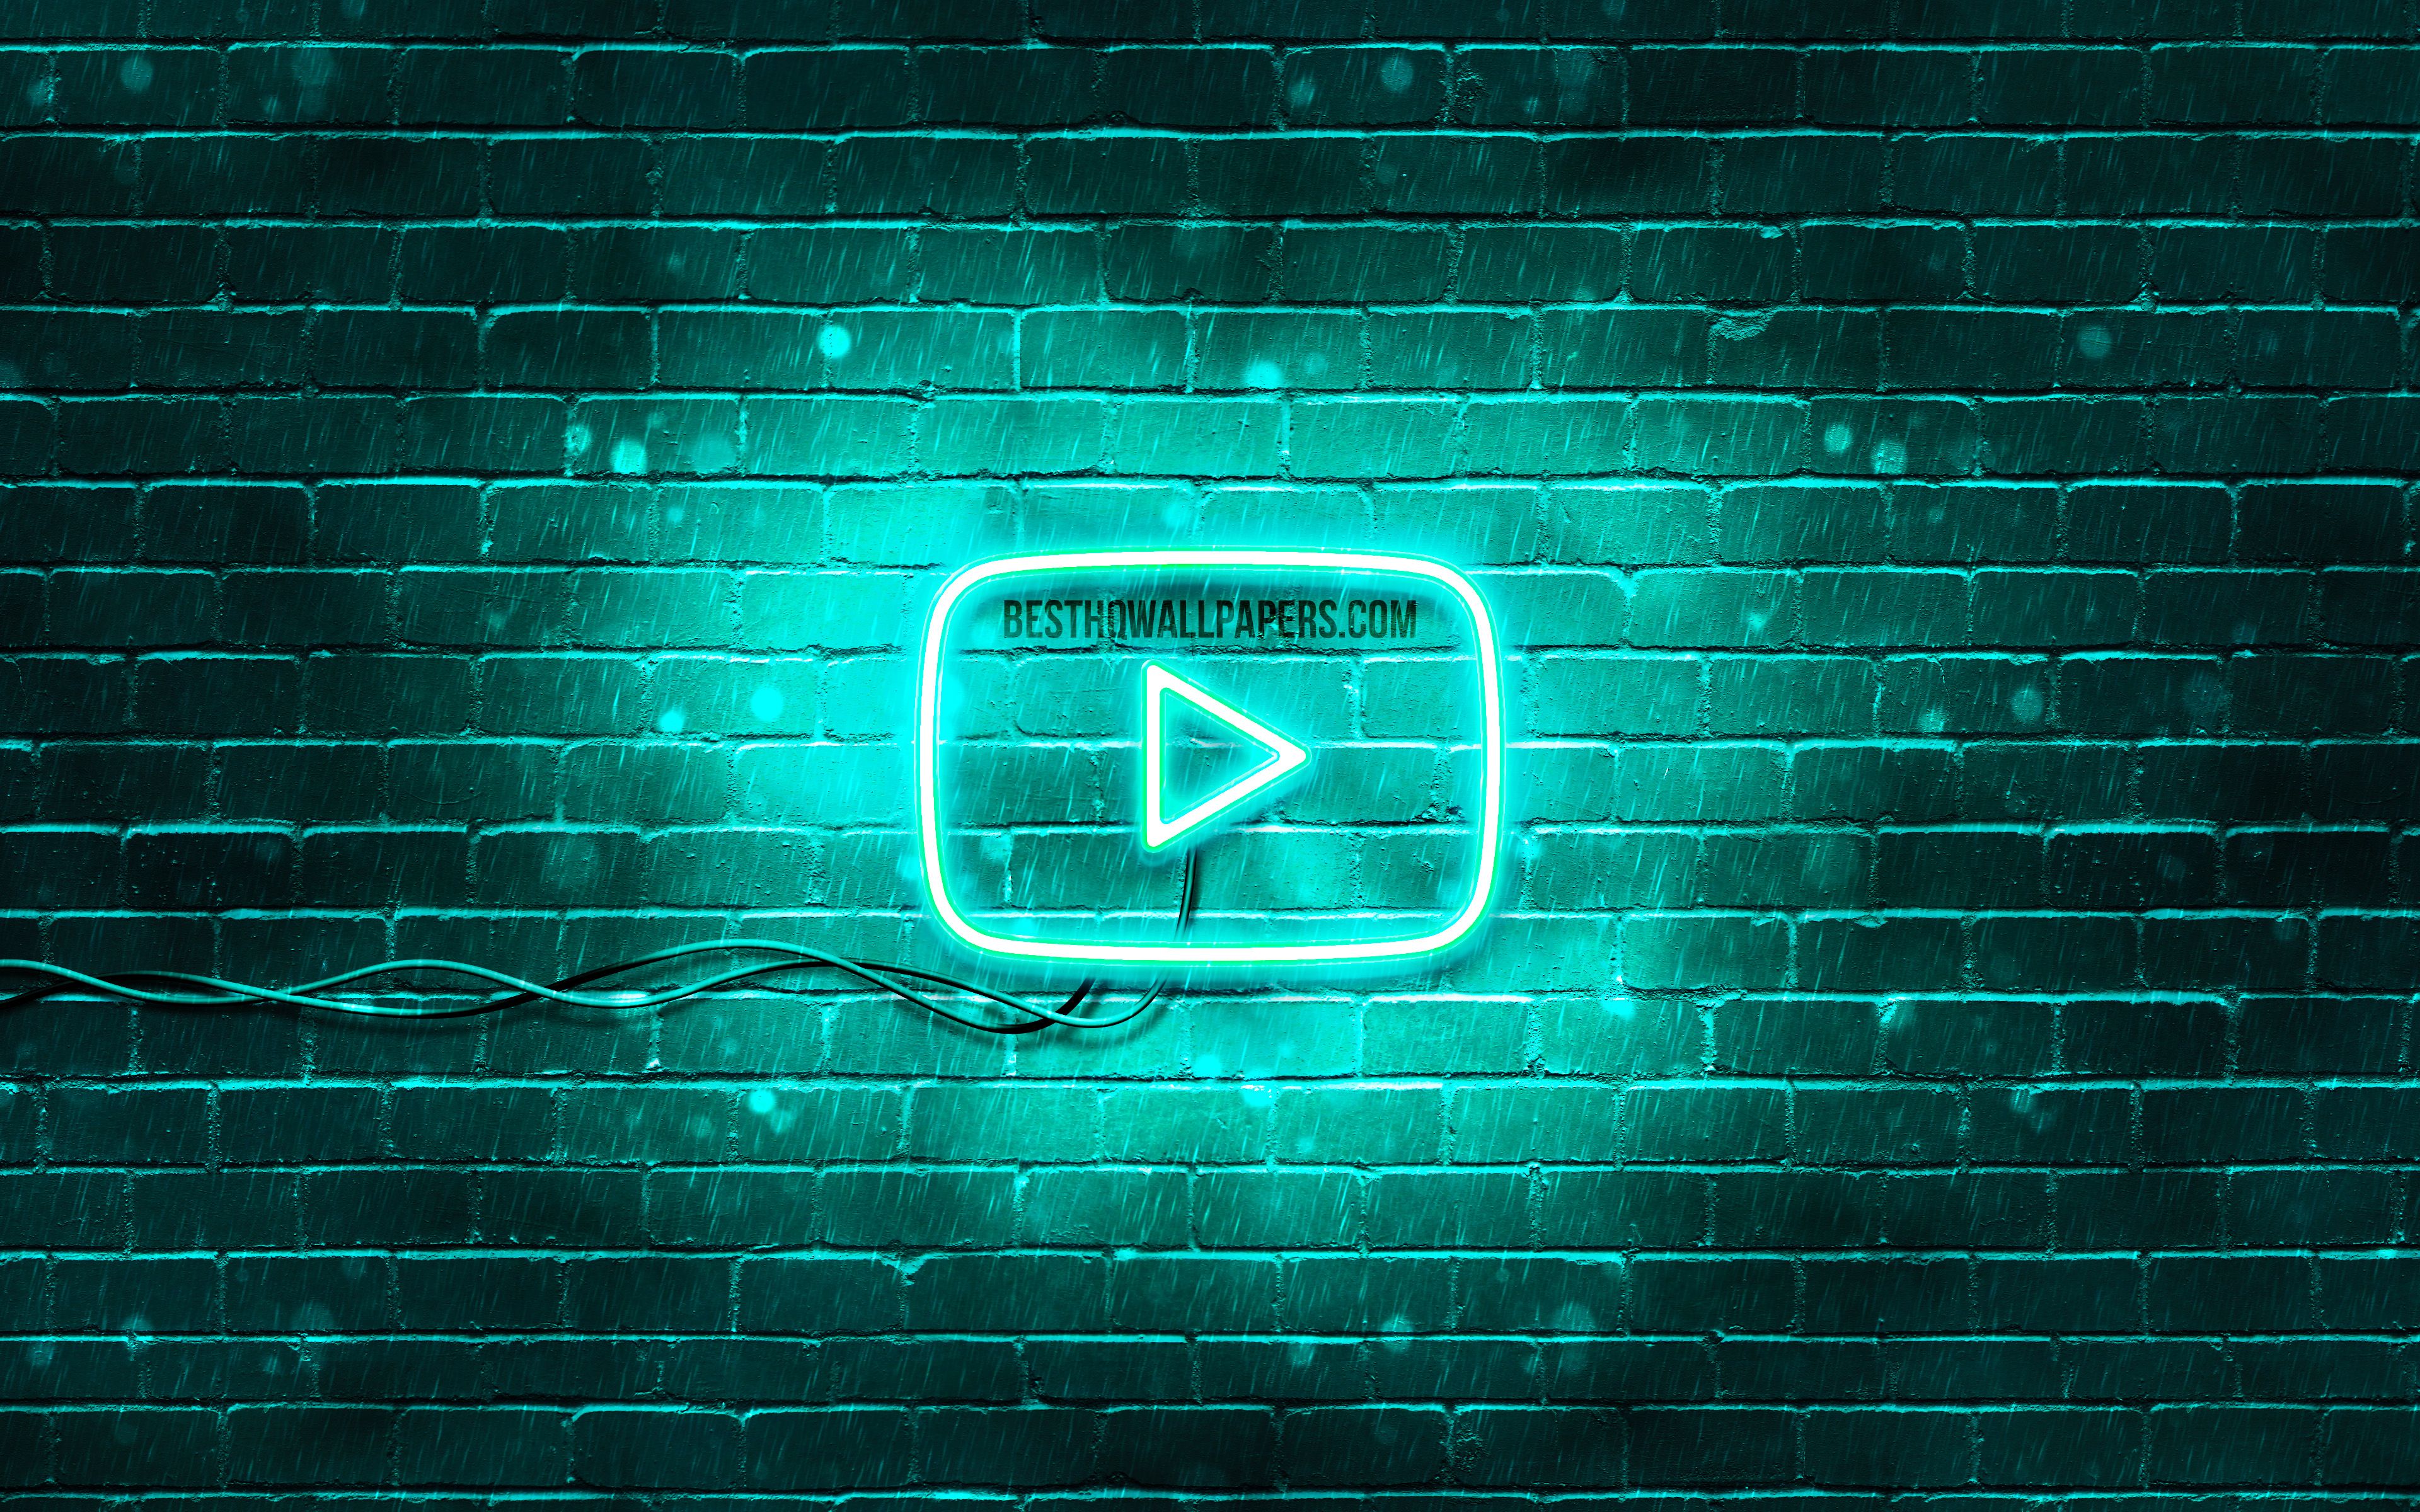 Download wallpaper Youtube turquoise logo, 4k, turquoise brickwall, Youtube logo, brands, Youtube neon logo, Youtube for desktop with resolution 3840x2400. High Quality HD picture wallpaper